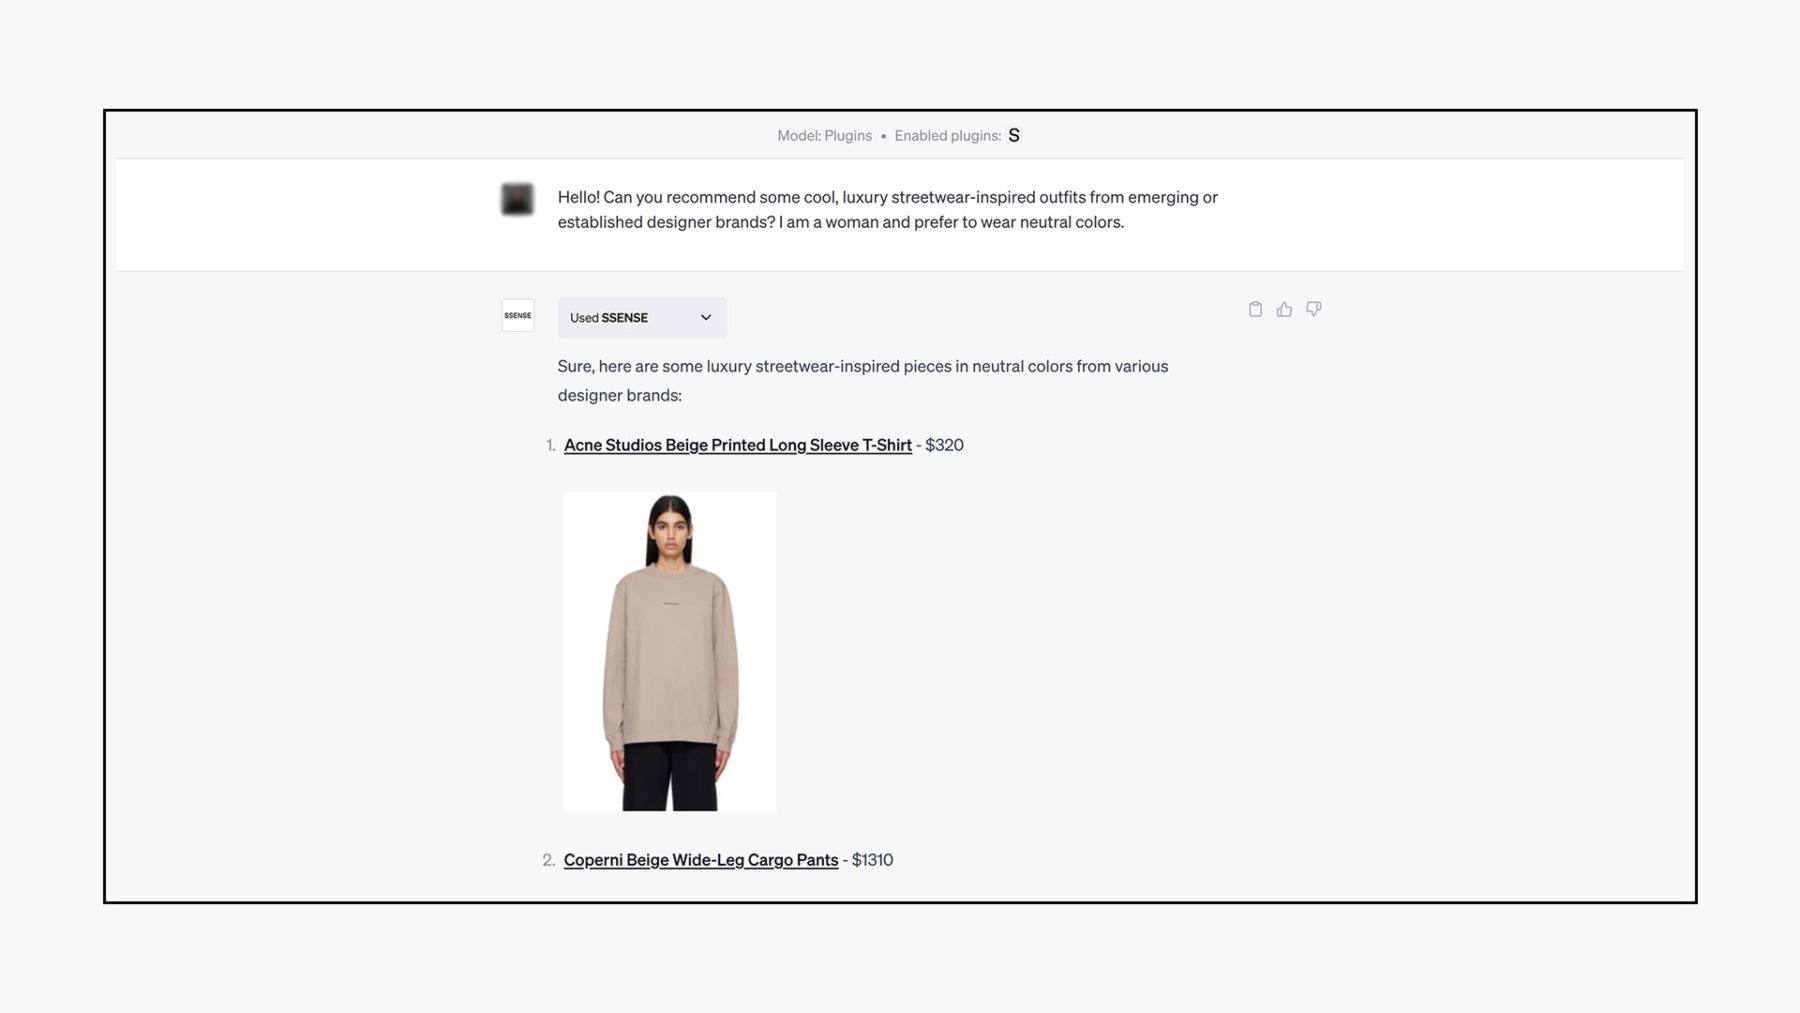 Ssense Launches an AI-Based Personal Styling Chatbot